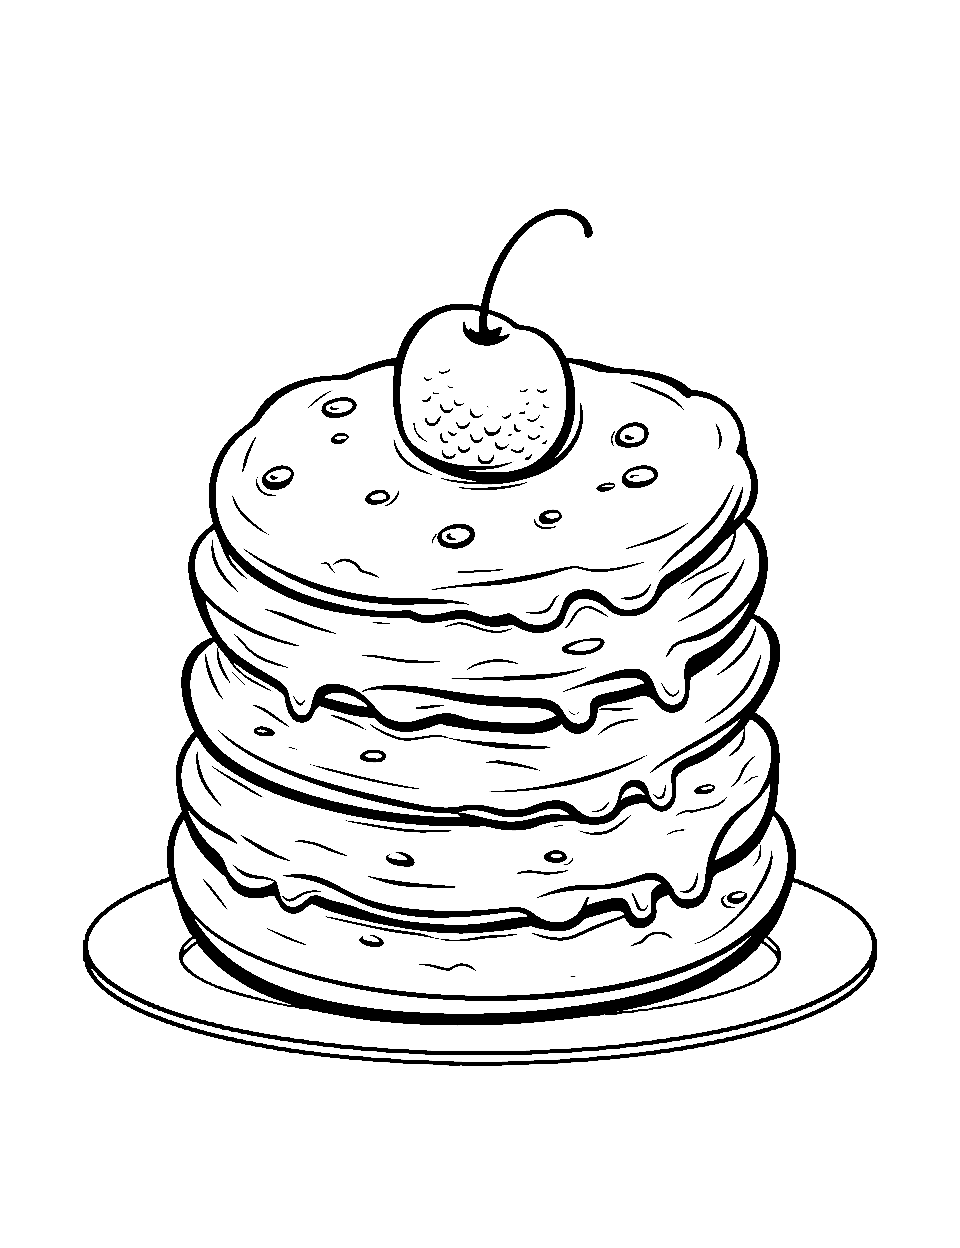 Breakfast Pancake Stack Food Coloring Page - A stack of pancakes drizzled with syrup and a berry on top.